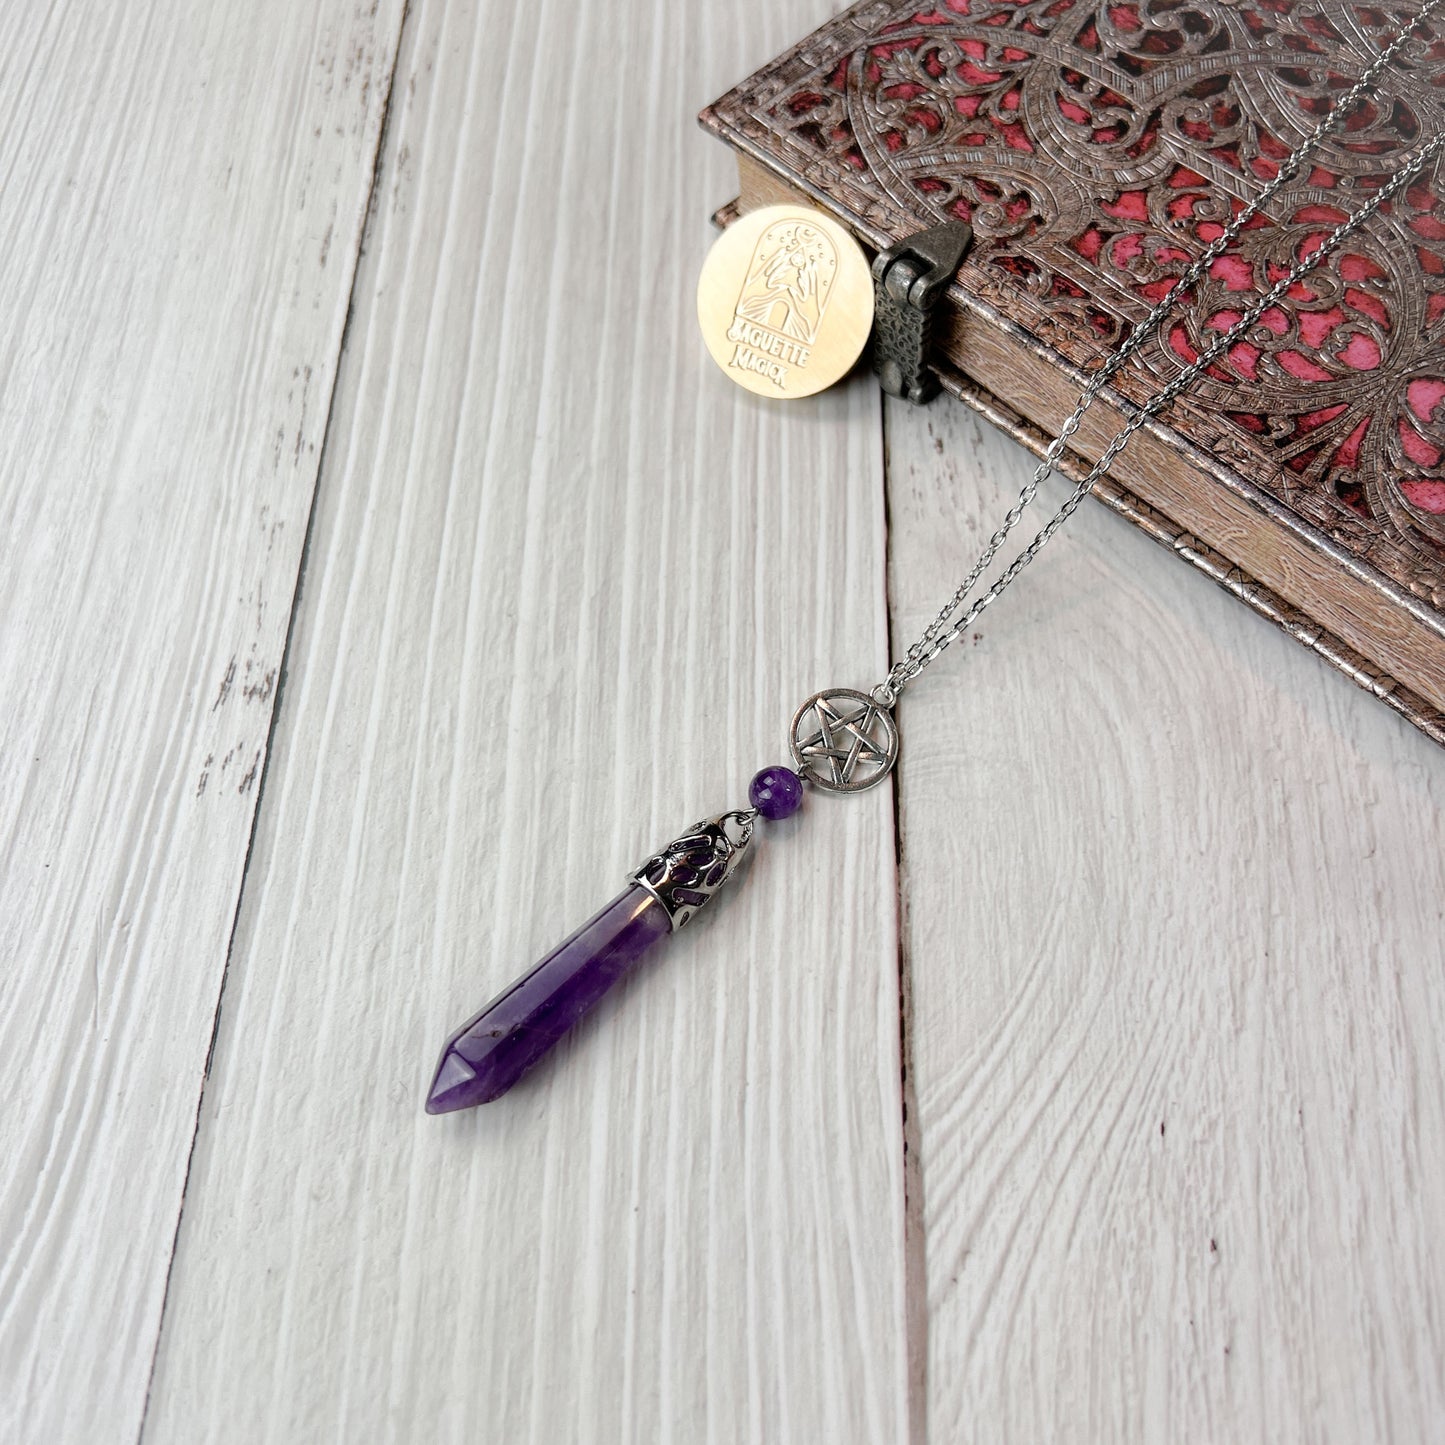 pentacle necklace amethyst pentacle for dowsing divination celtic pagan wiccan witchcraft jewelry baguette magick